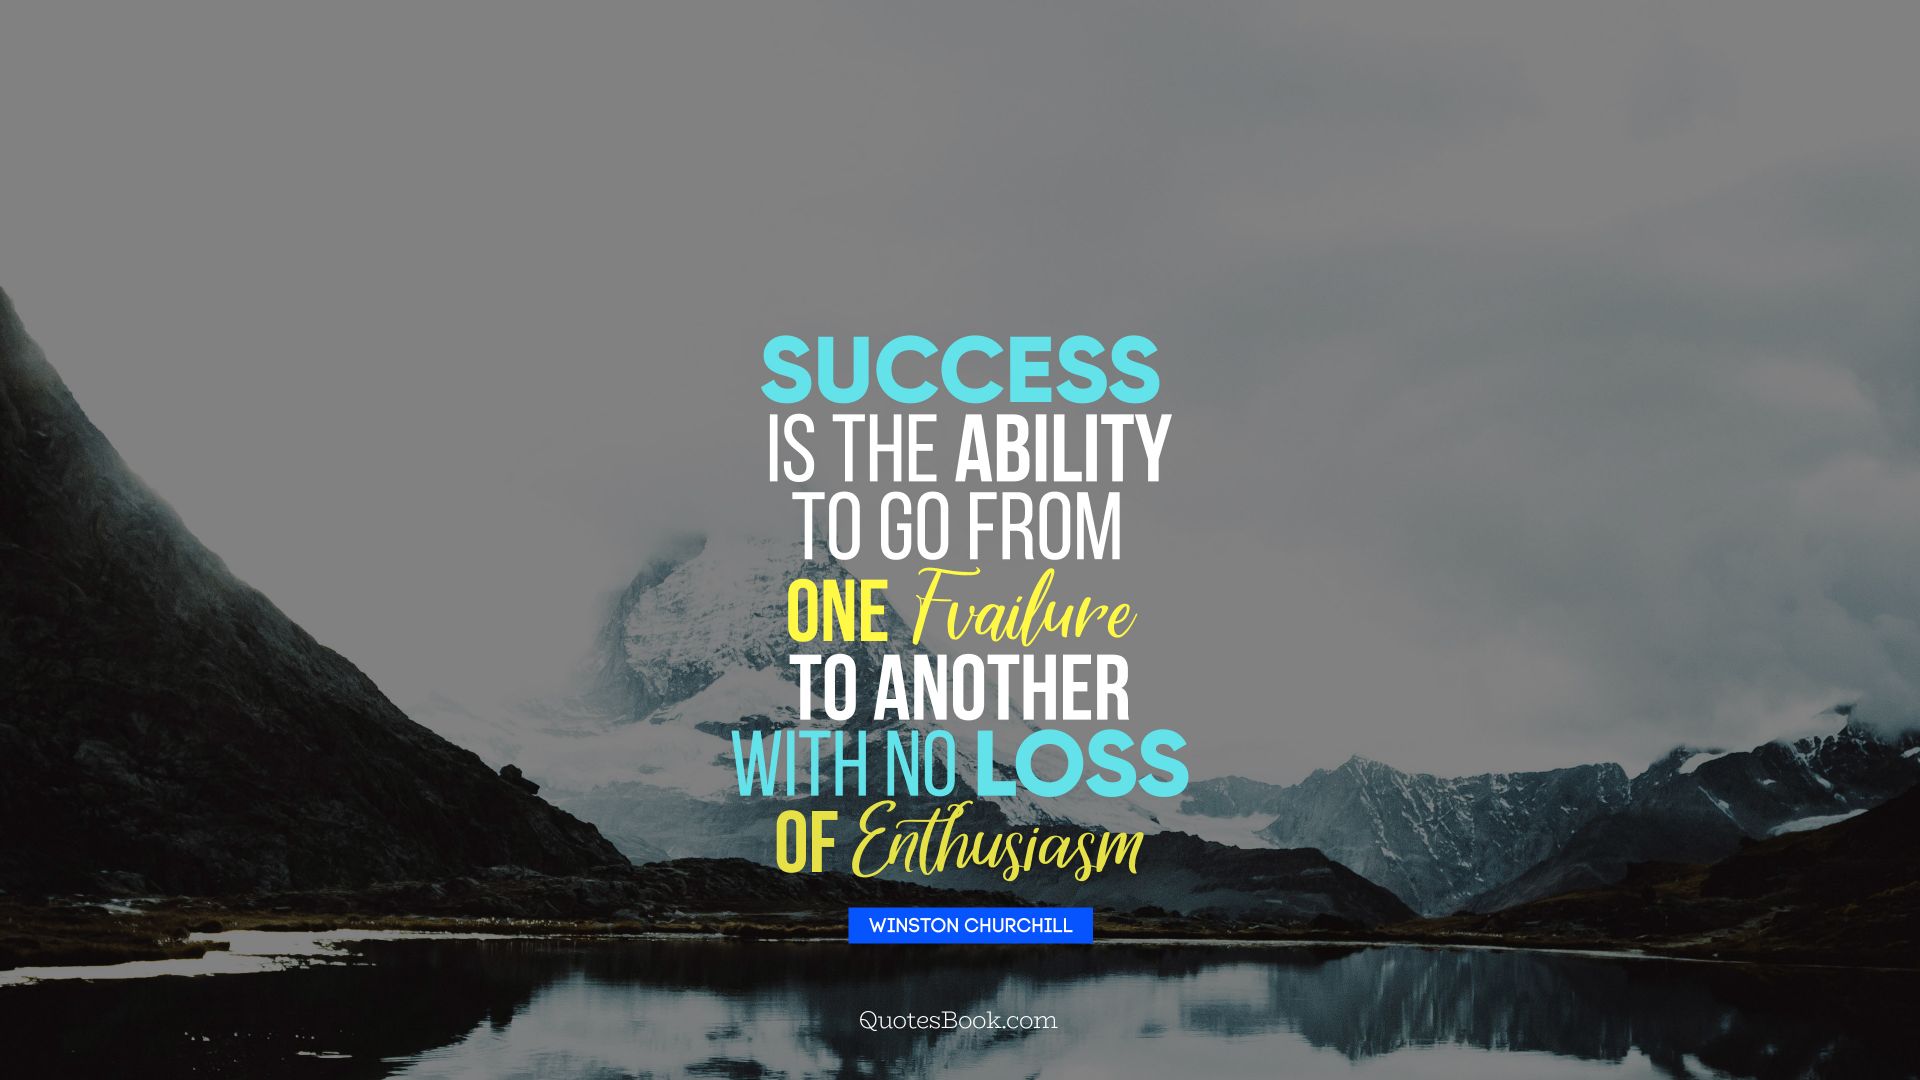 Success is the ability to go from one failure to another with no loss of enthusiasm. - Quote by Winston Churchille